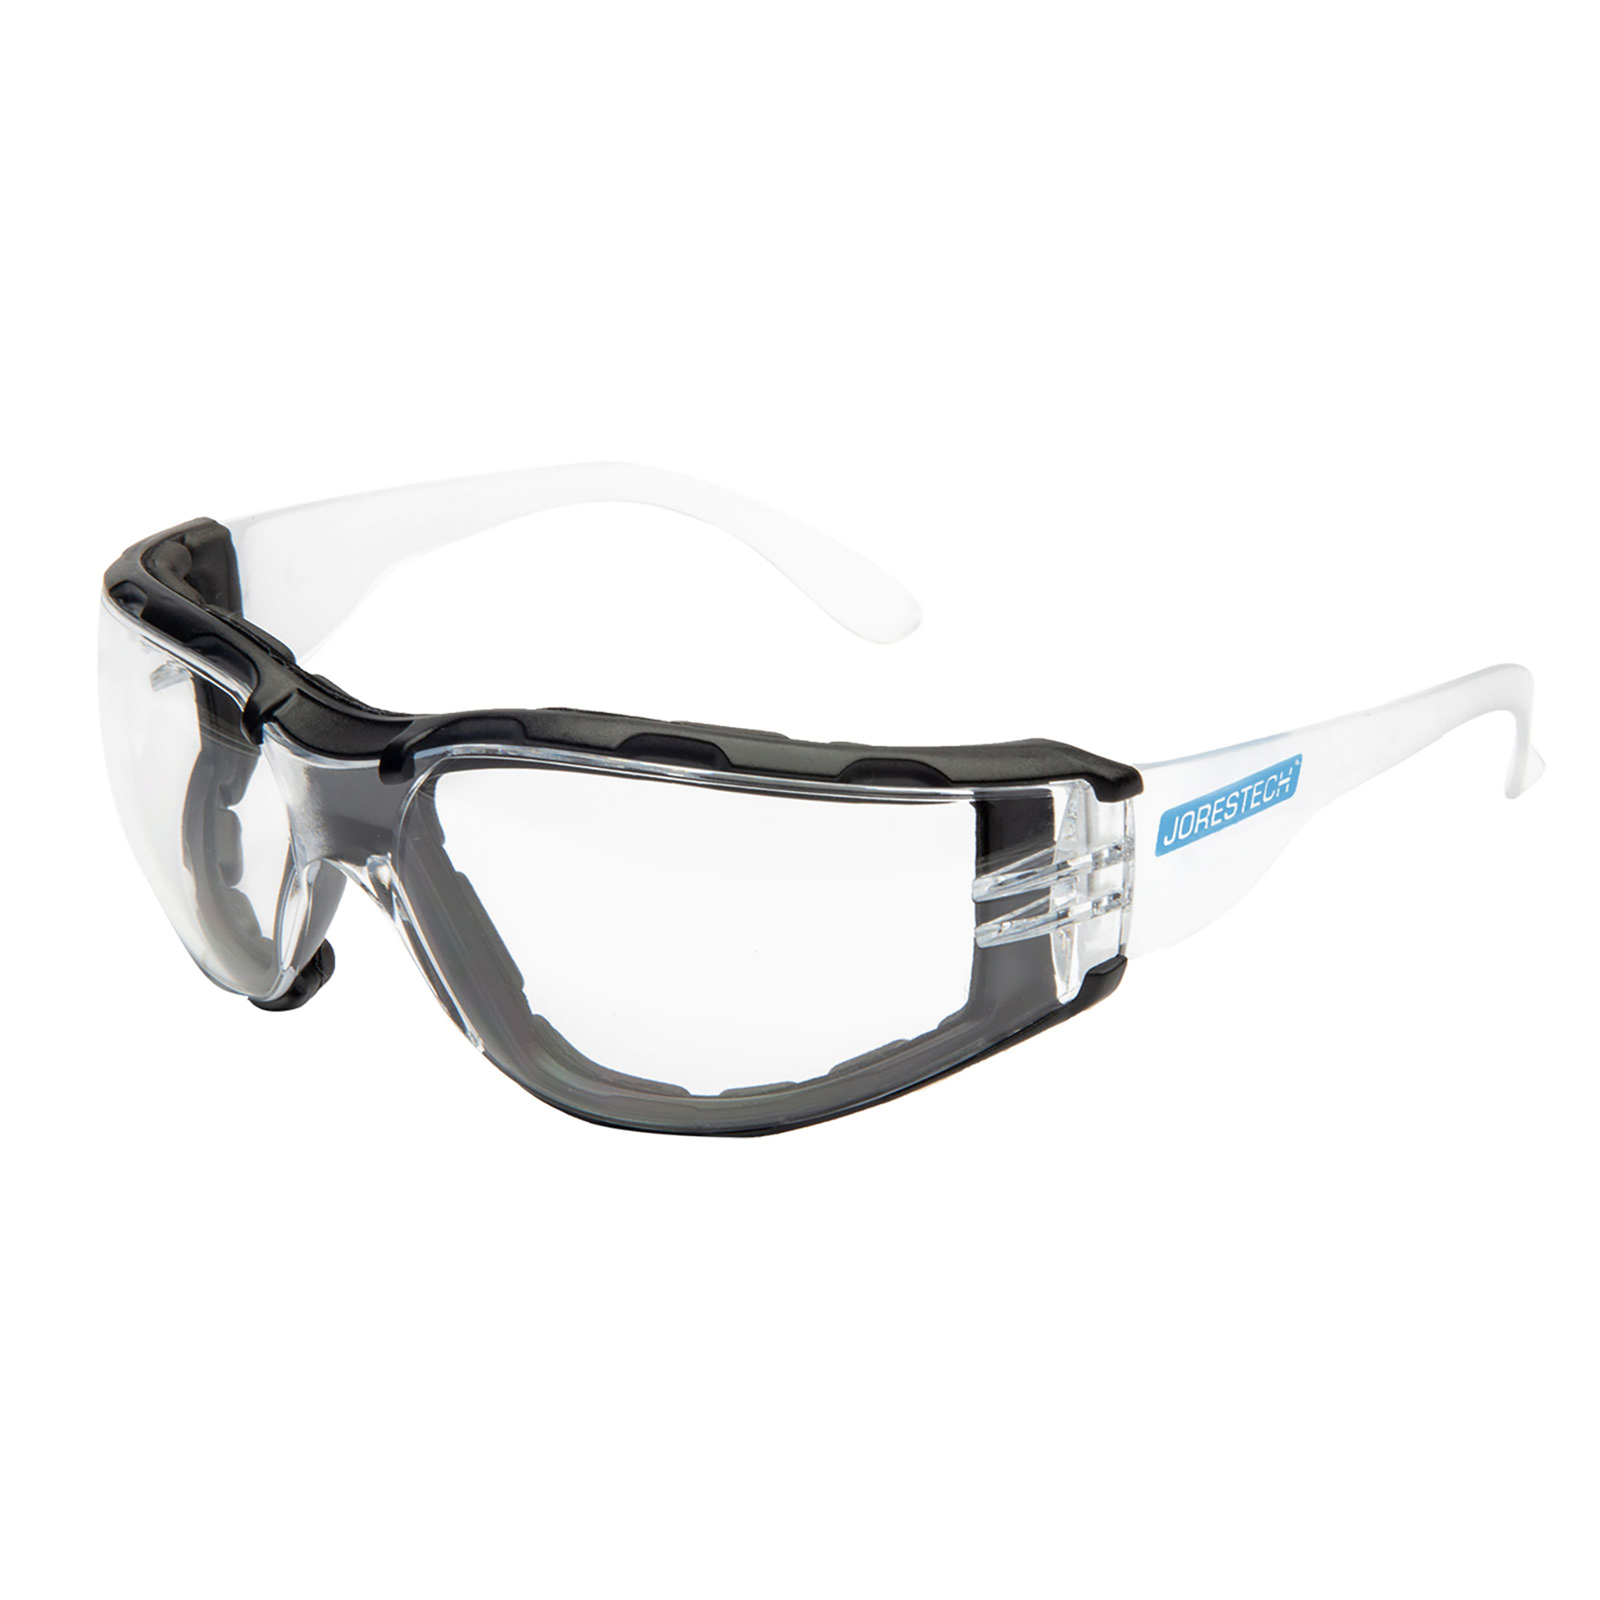 Diagonal view of the JORESTECH clear safety glasses for high impact protection with a black foam gasket